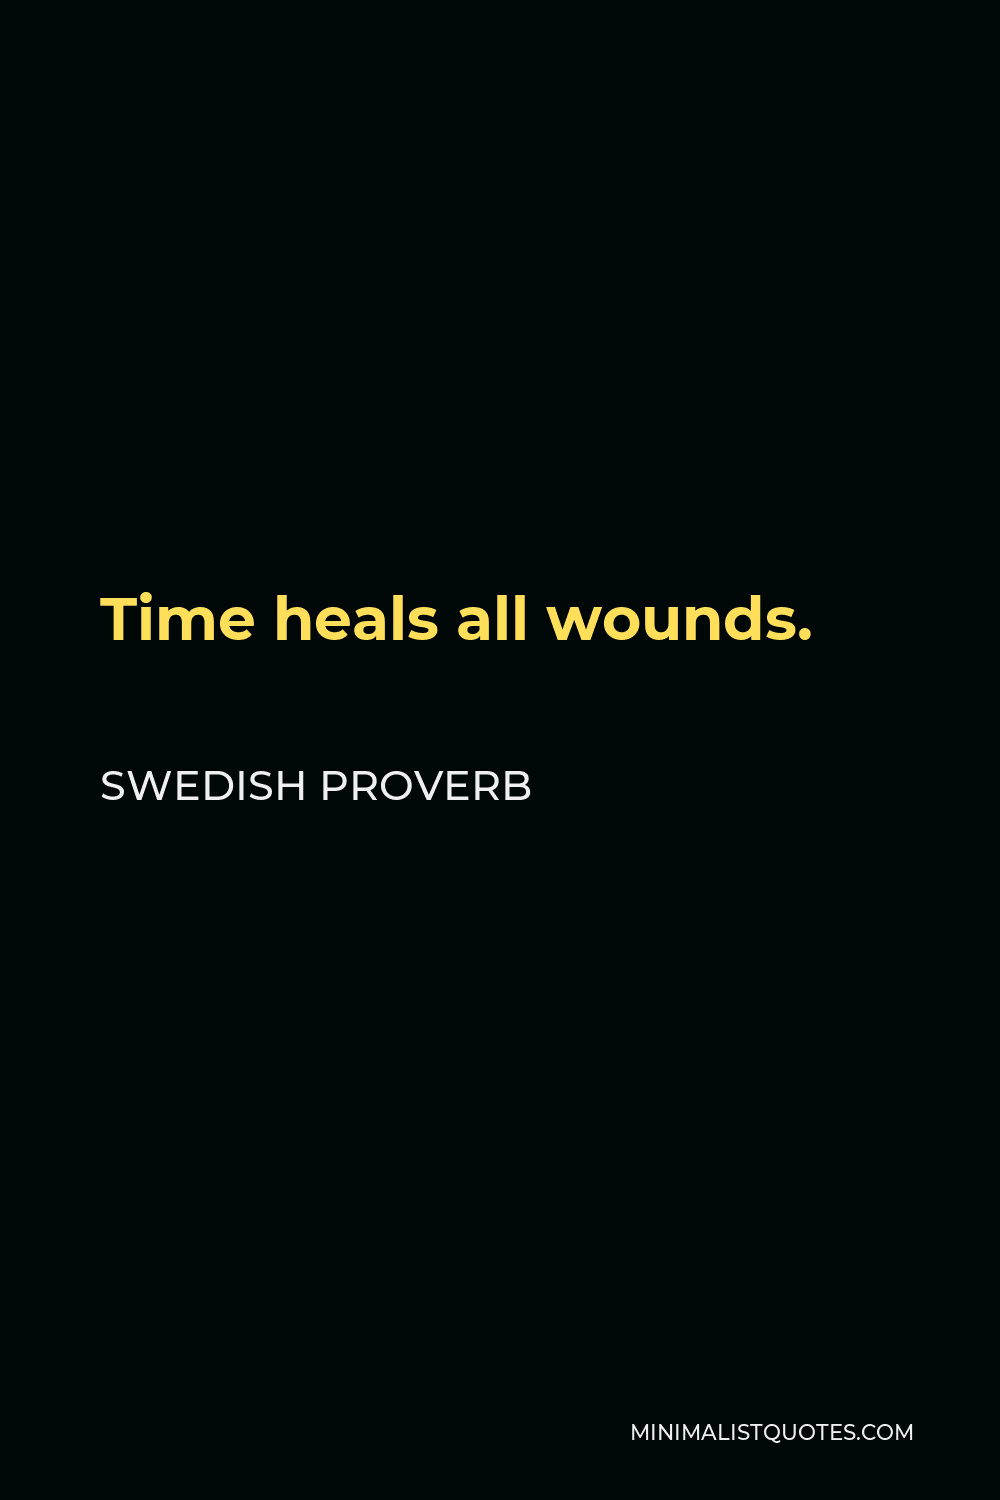 Swedish Proverb Quote - Time heals all wounds.